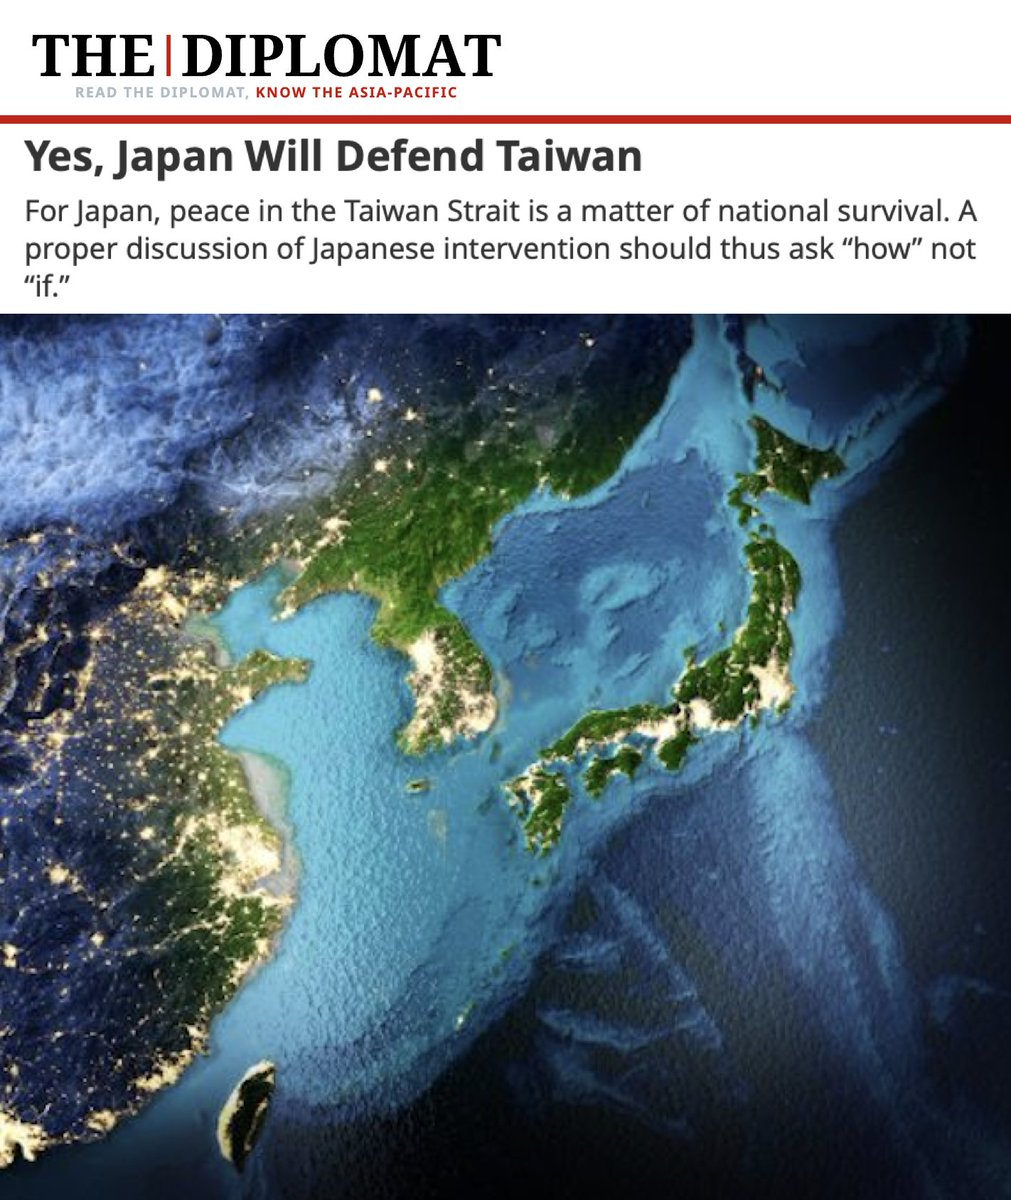 Yes, #Japan Will Defend #Taiwan

For Japan, peace in the Taiwan Strait is a matter of national survival. A proper discussion of Japanese intervention should thus ask “how” not “if.”

Japan will defend Taiwan because doing so is integral to its national security. The proper